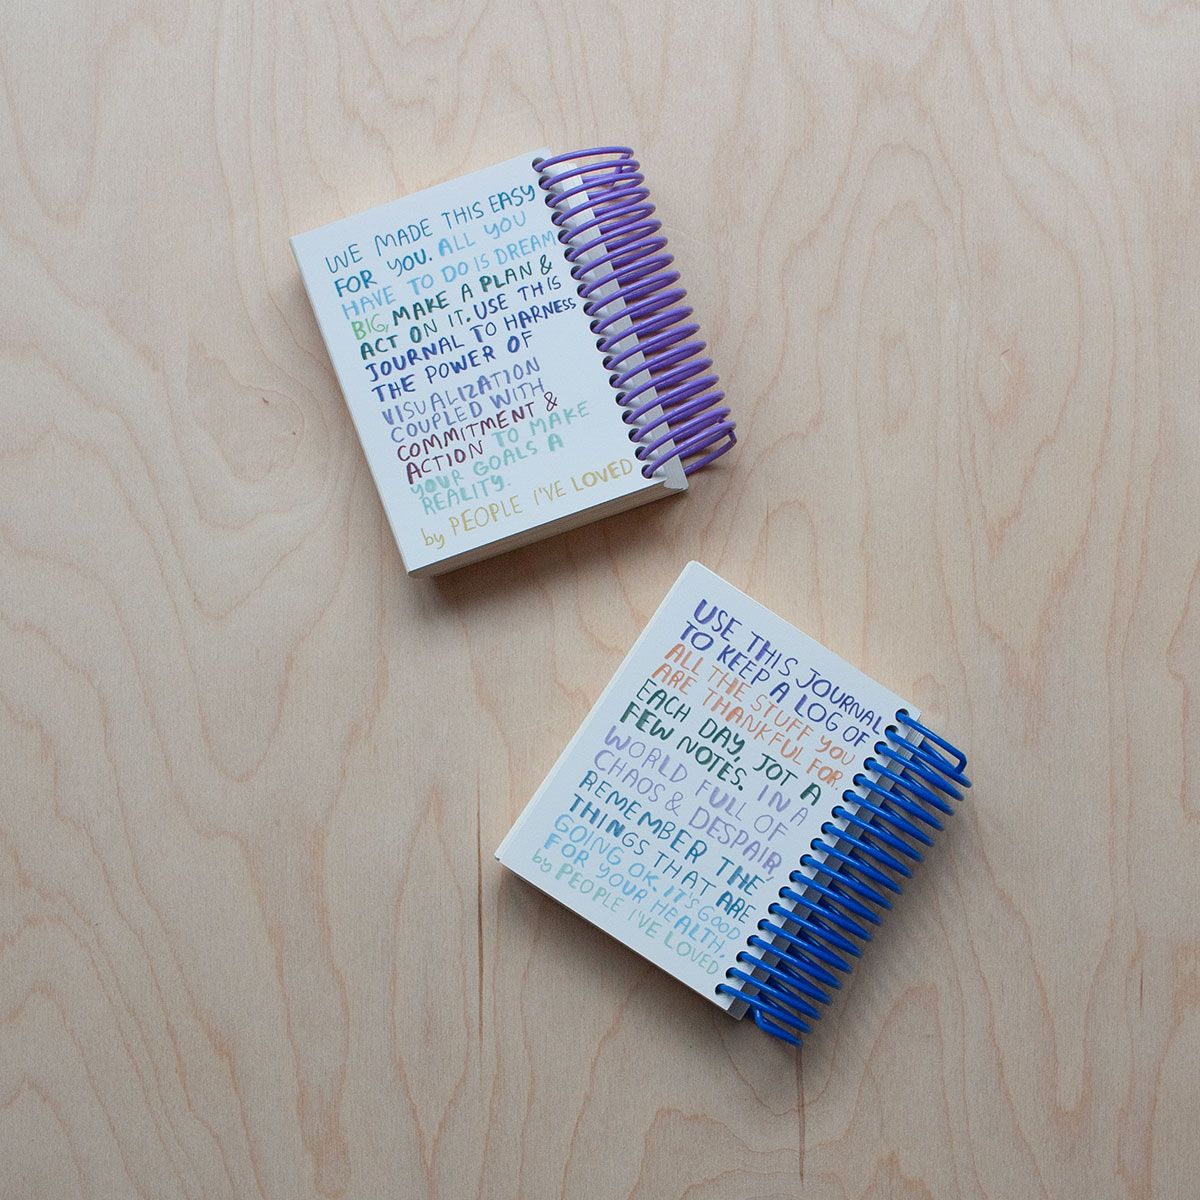 Two spiral-bound journals on a wooden surface: one with a purple coil and another with a blue coil with colorful text filling the back page.